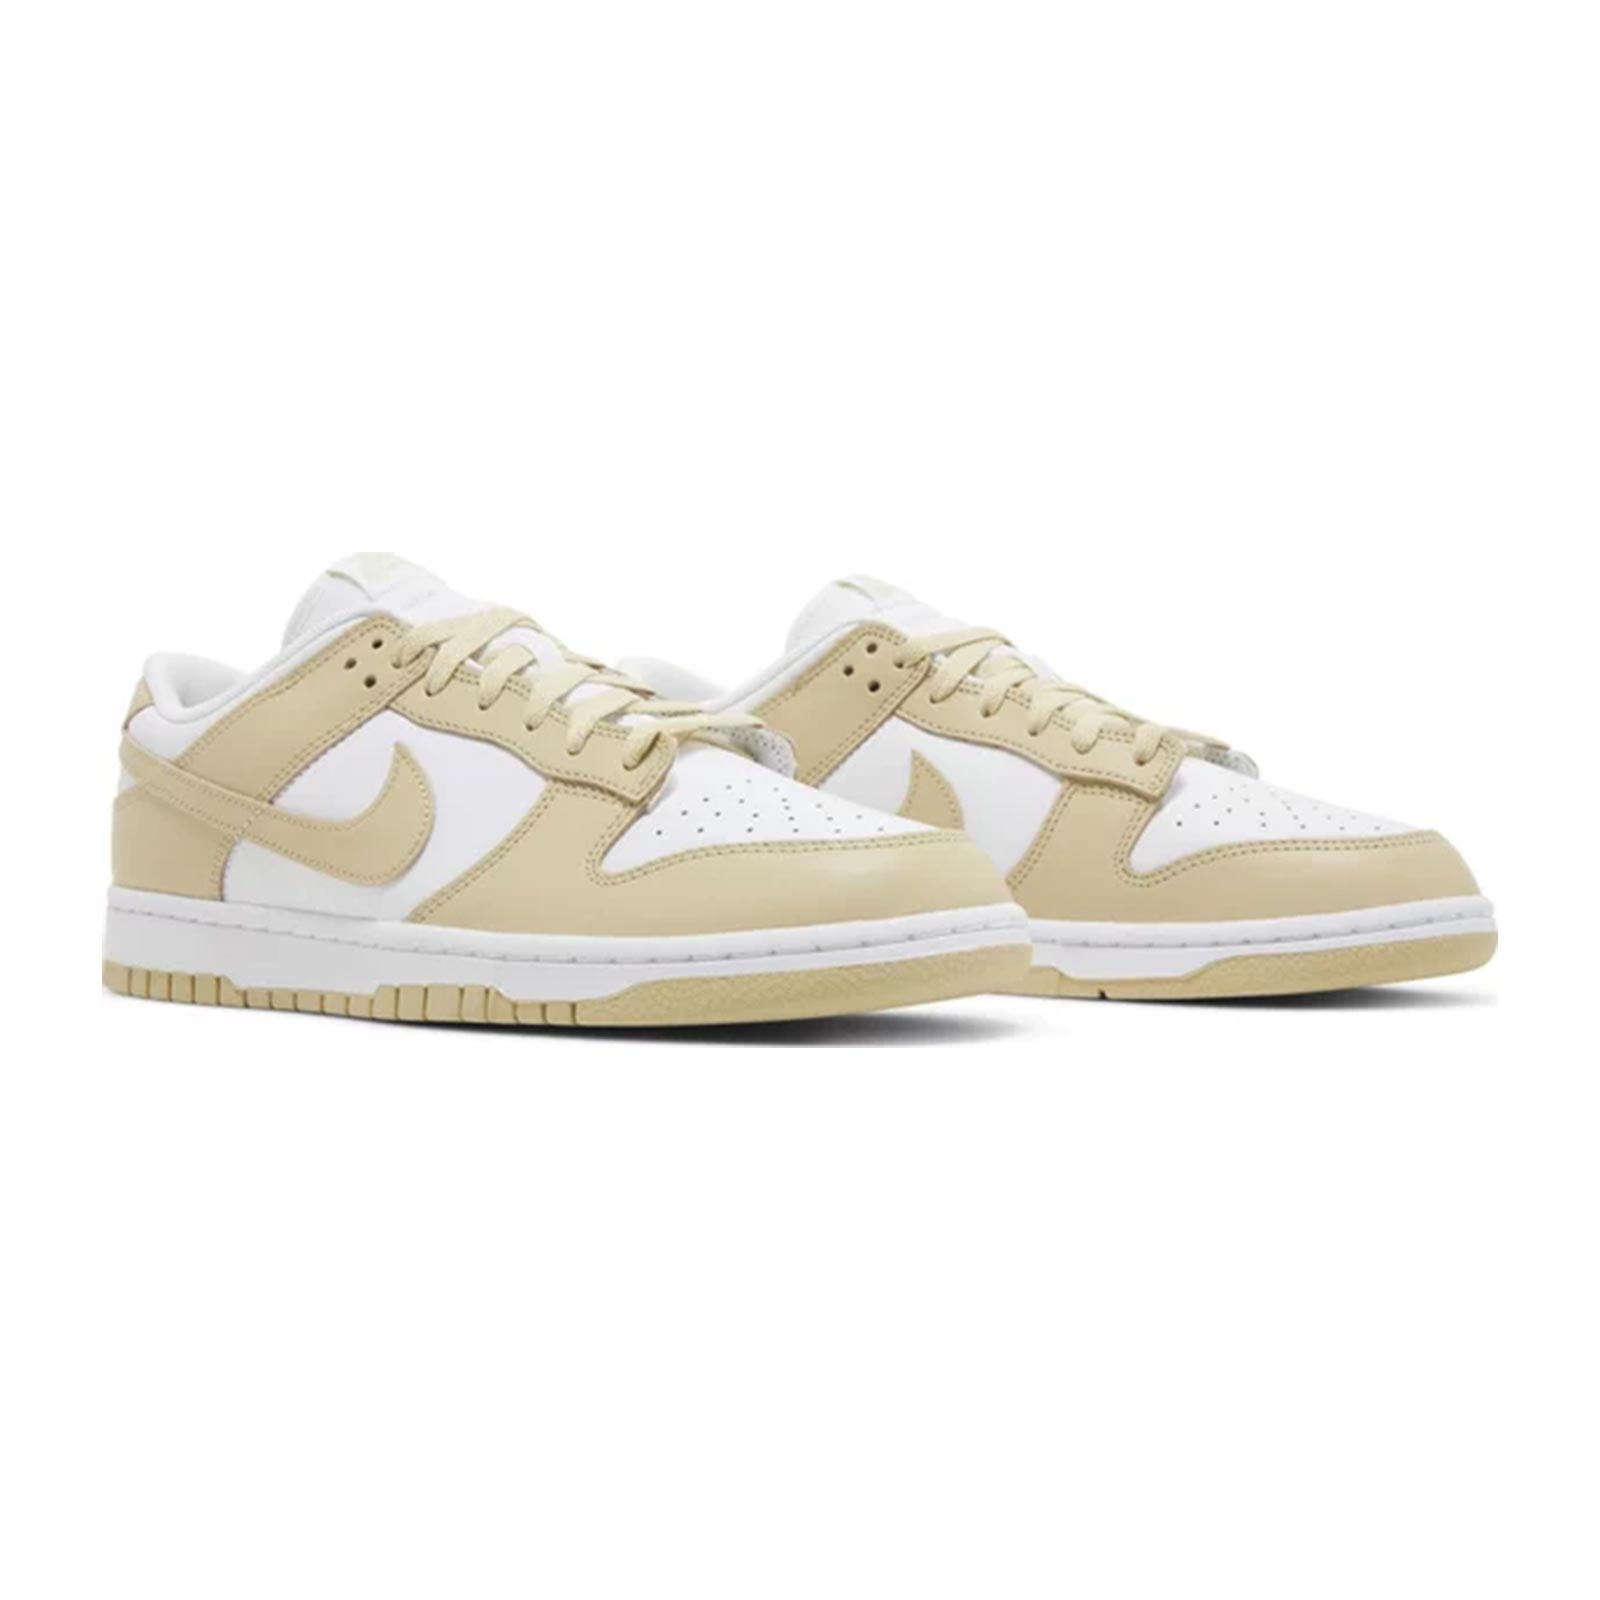 Nike Dunk Low, Team Gold